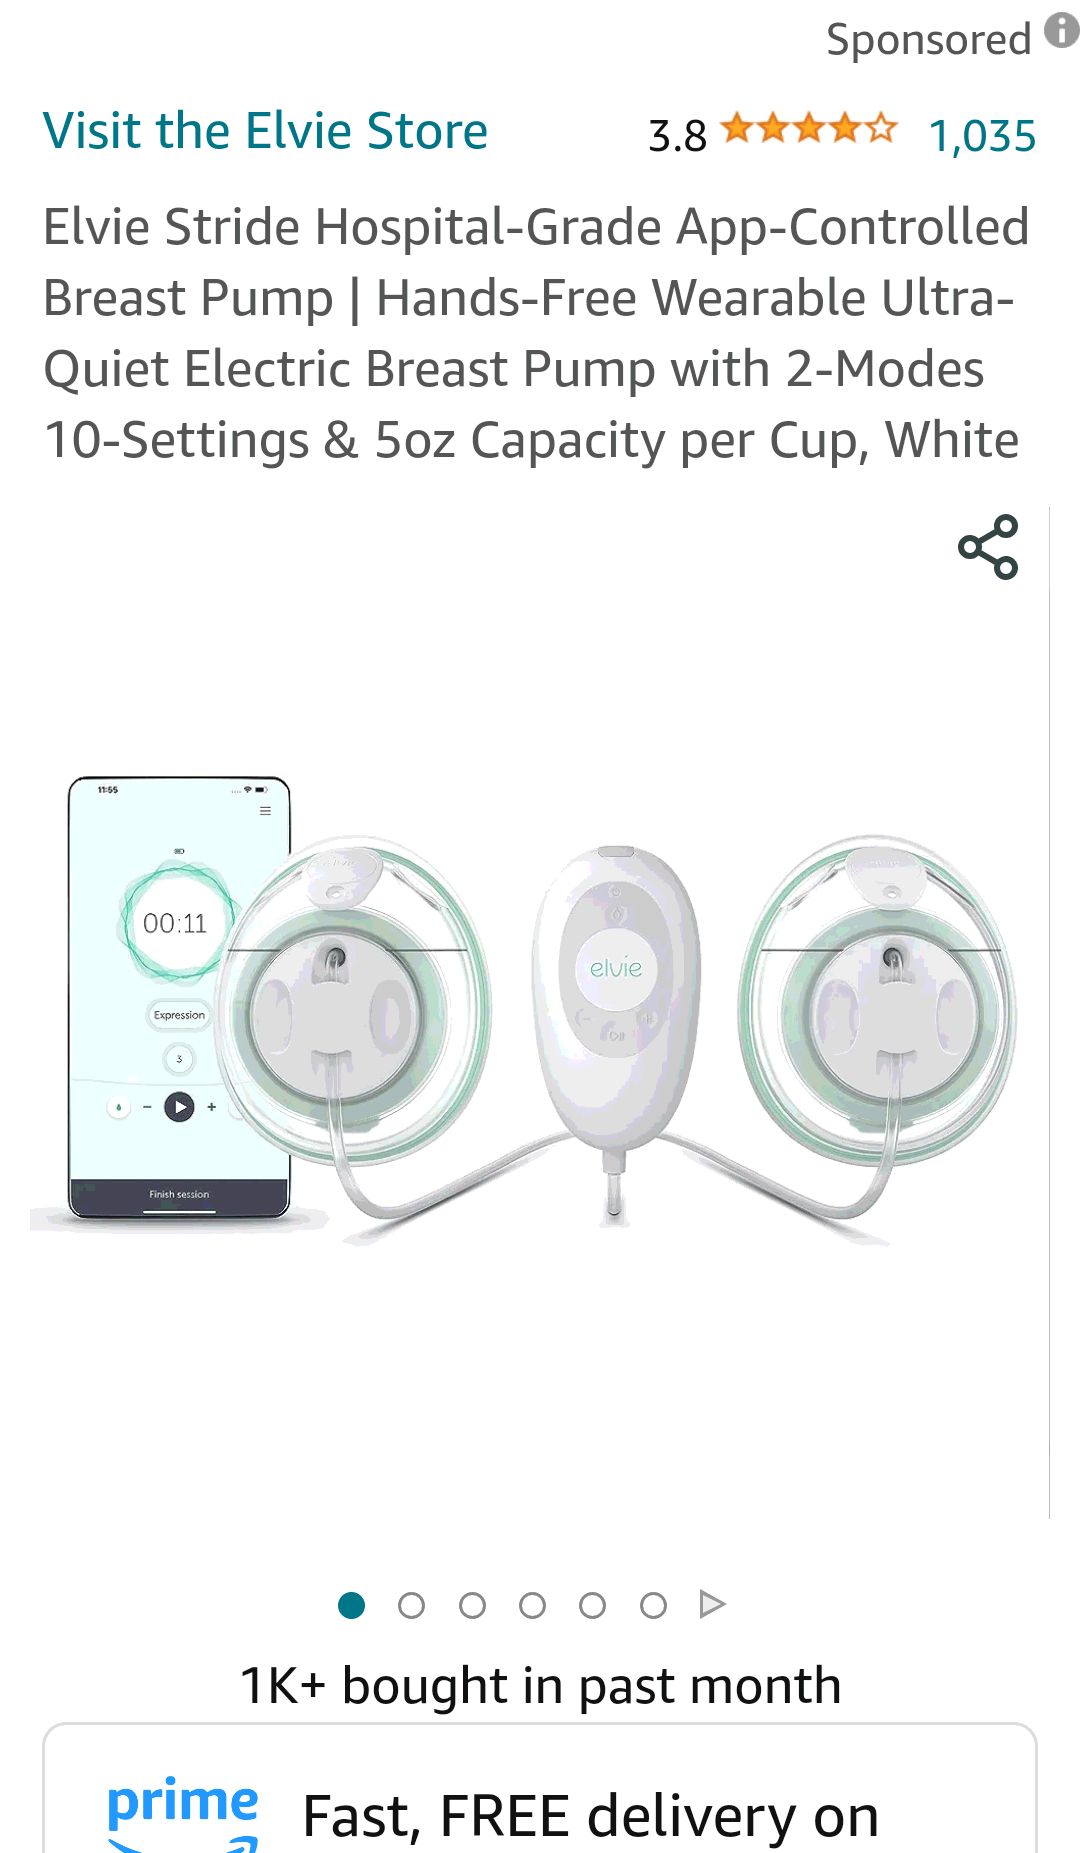 Amazon.com : Elvie Stride Hospital-Grade App-Controlled Breast Pump | Hands-Free Wearable Ultra-Quiet Electric Breast Pump with 2-Modes 10-Settings & 5oz Capacity per Cup, White : Baby